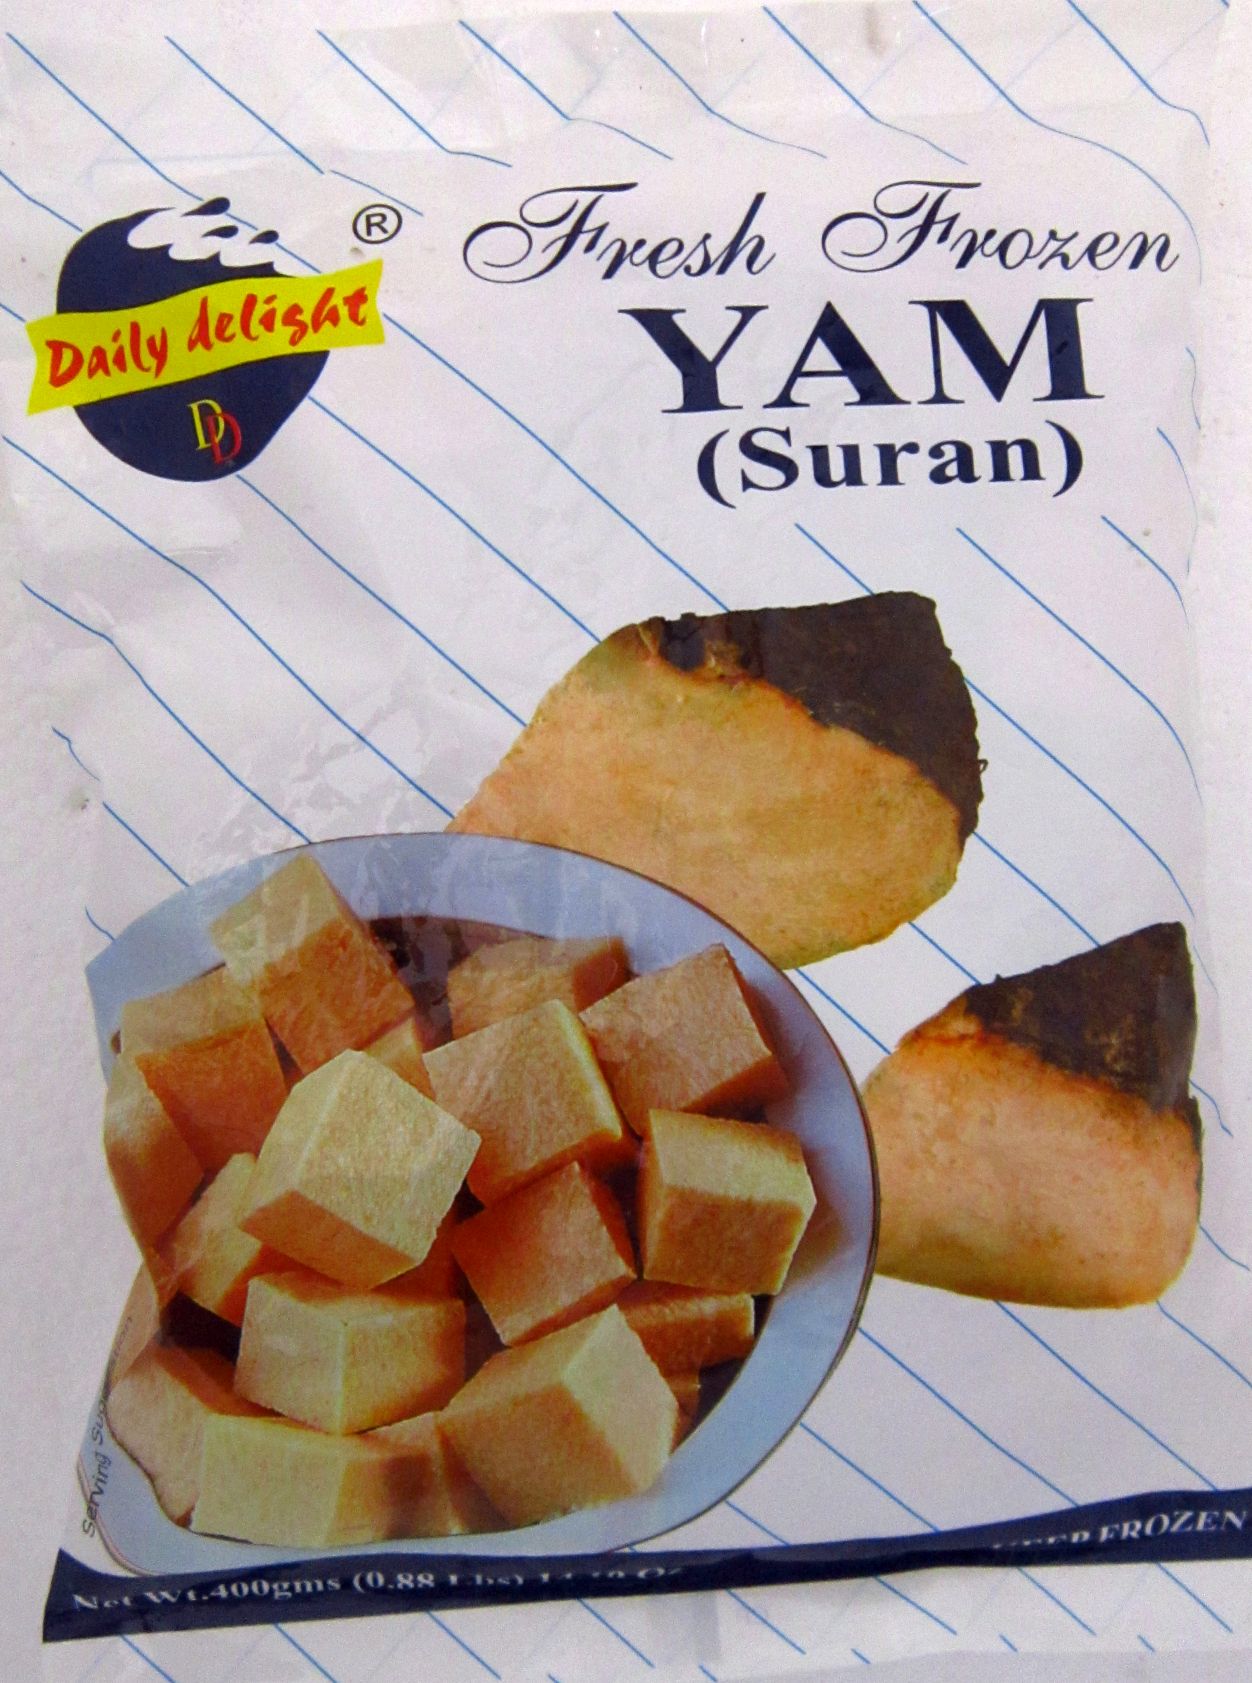 Daily Delight Yam (Suran) Image